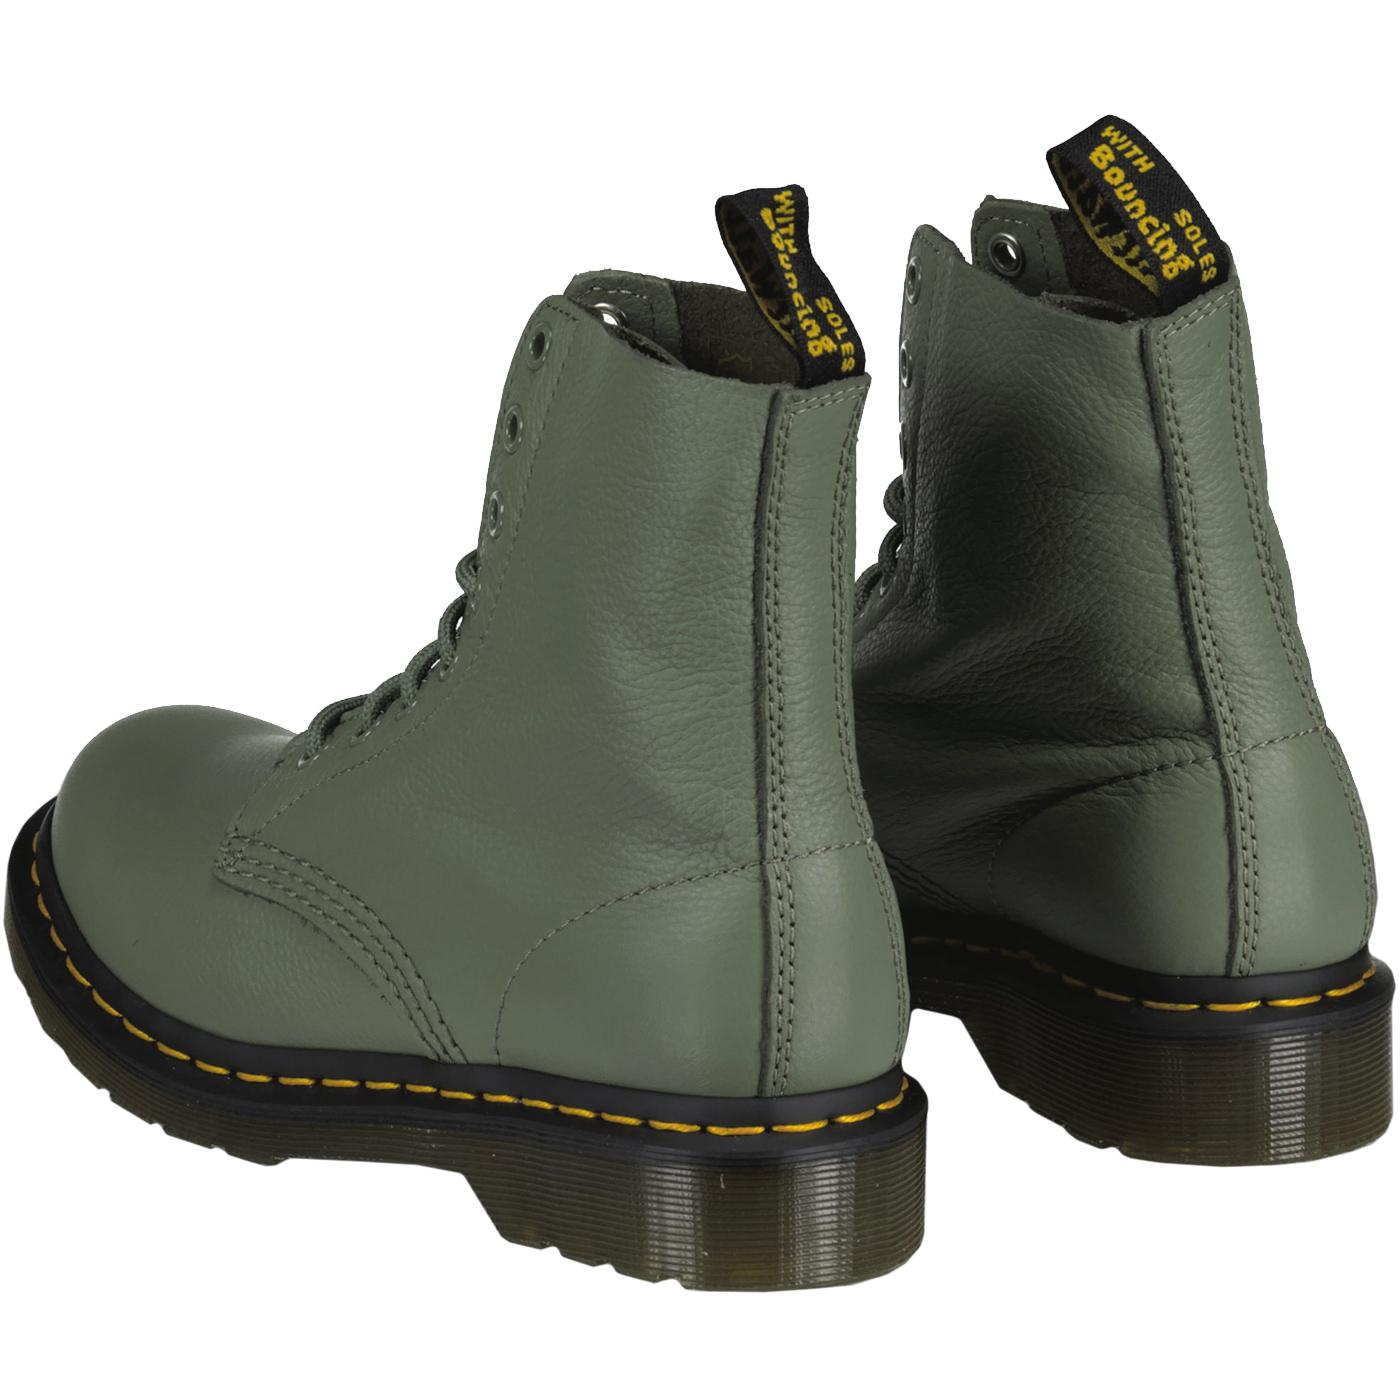 1460 Pascal DR MARTENS Retro 8 Eyelet Boots in Khaki Green